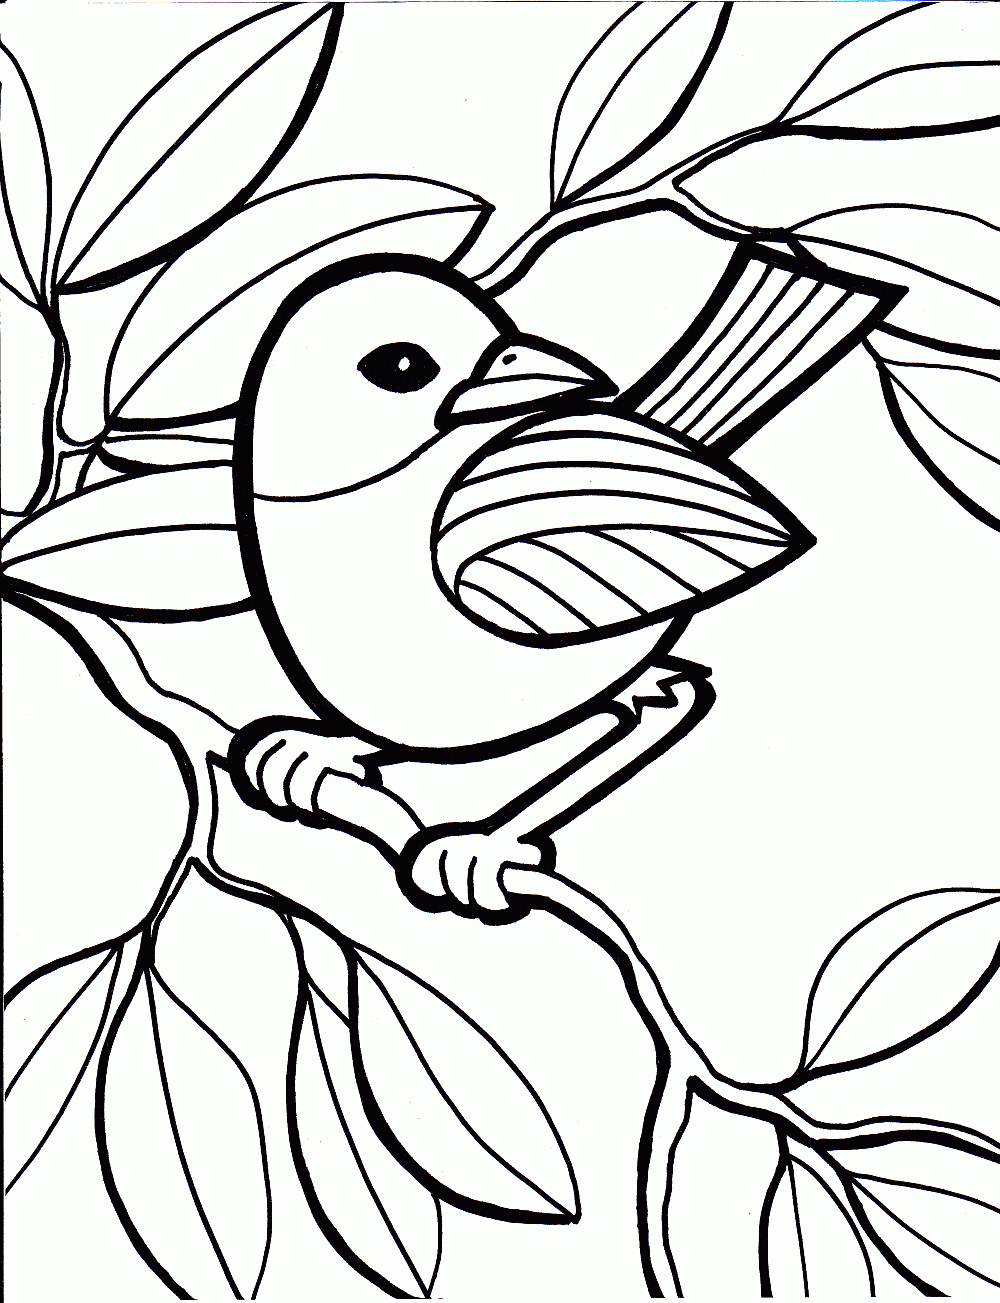 Free Coloring Pages For Kids - Top Profile Pictures - Display Pictures